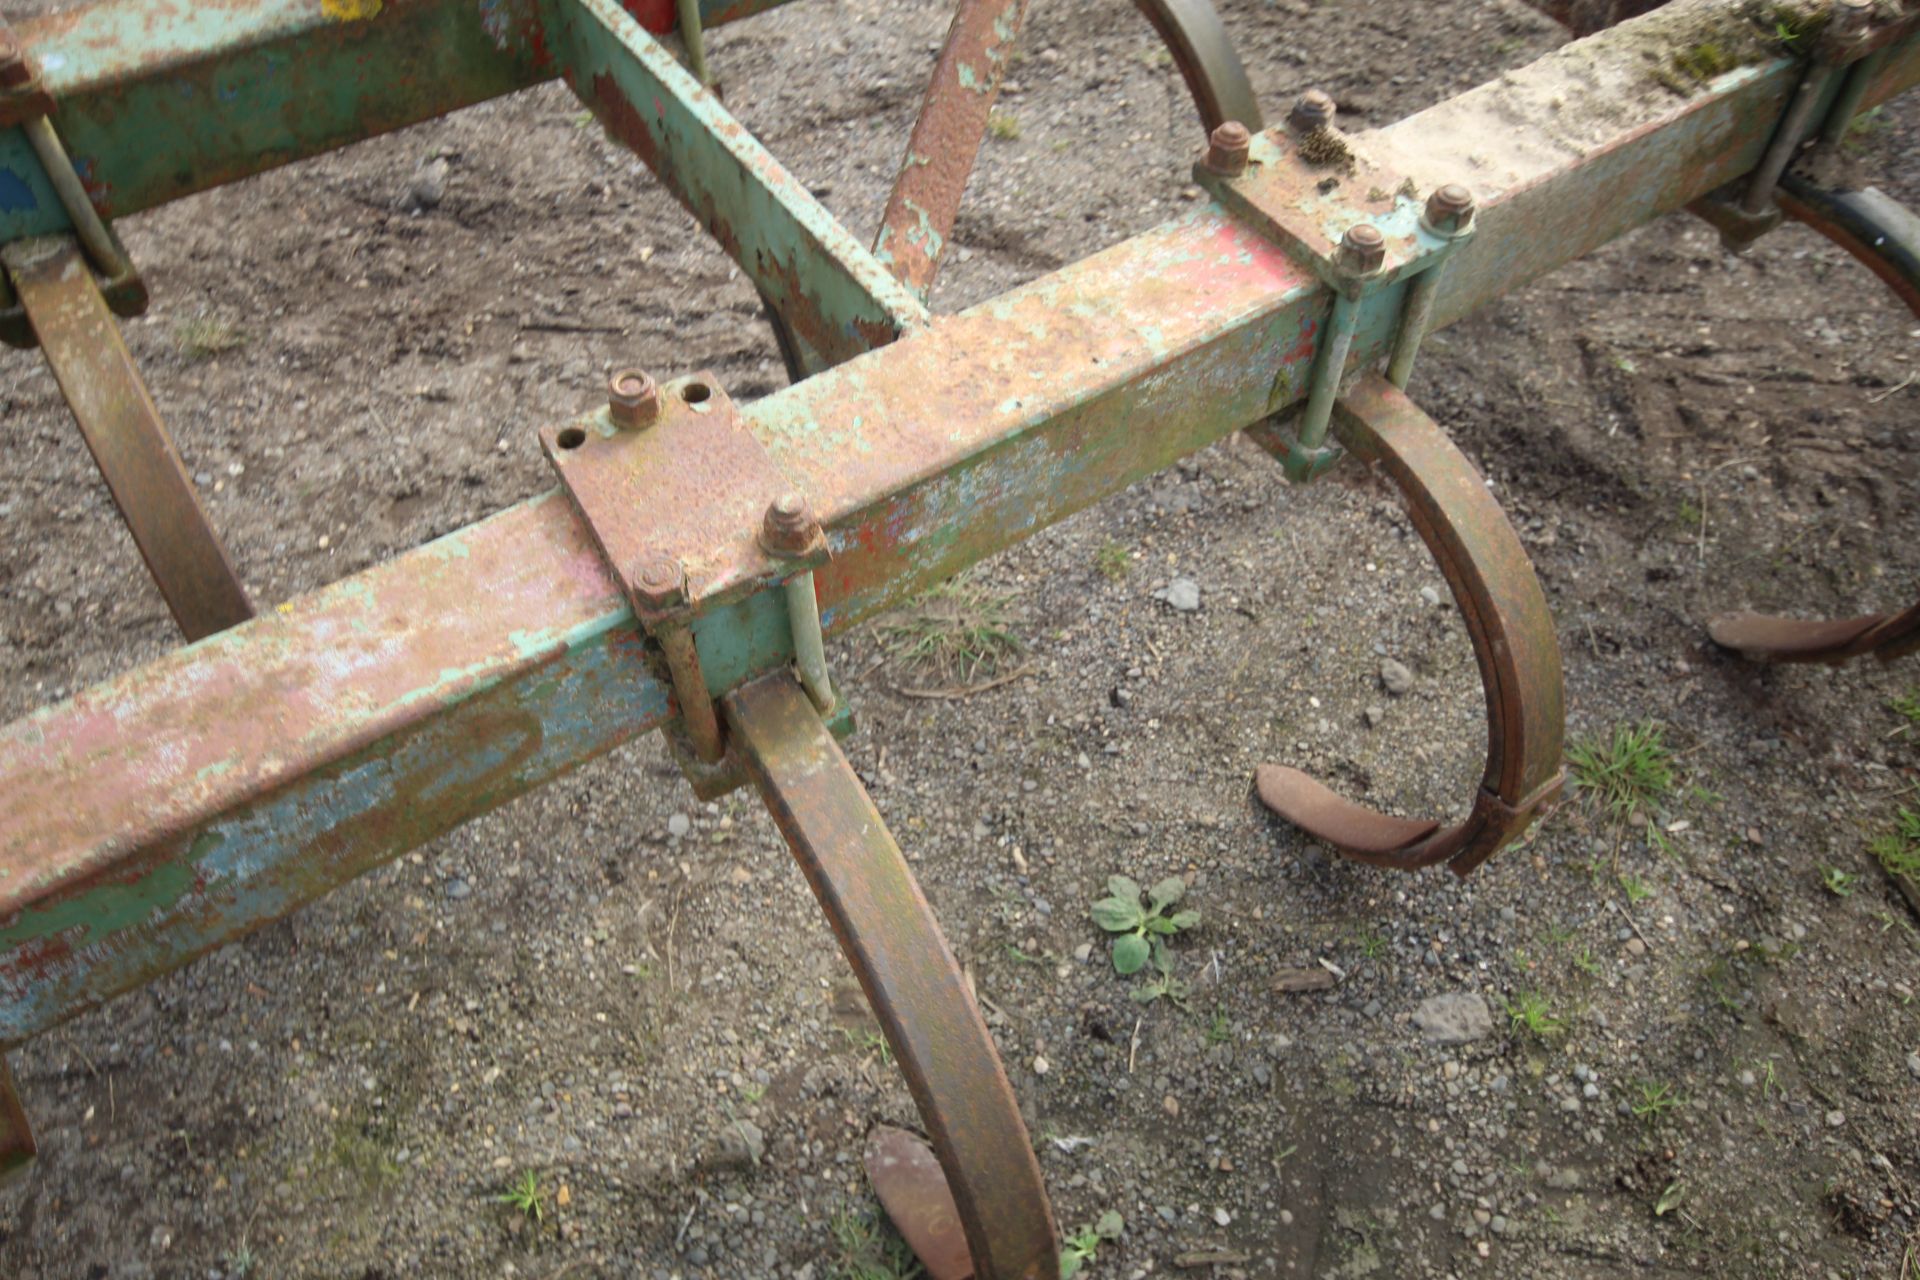 4m sprung tine cultivator. - Image 9 of 15